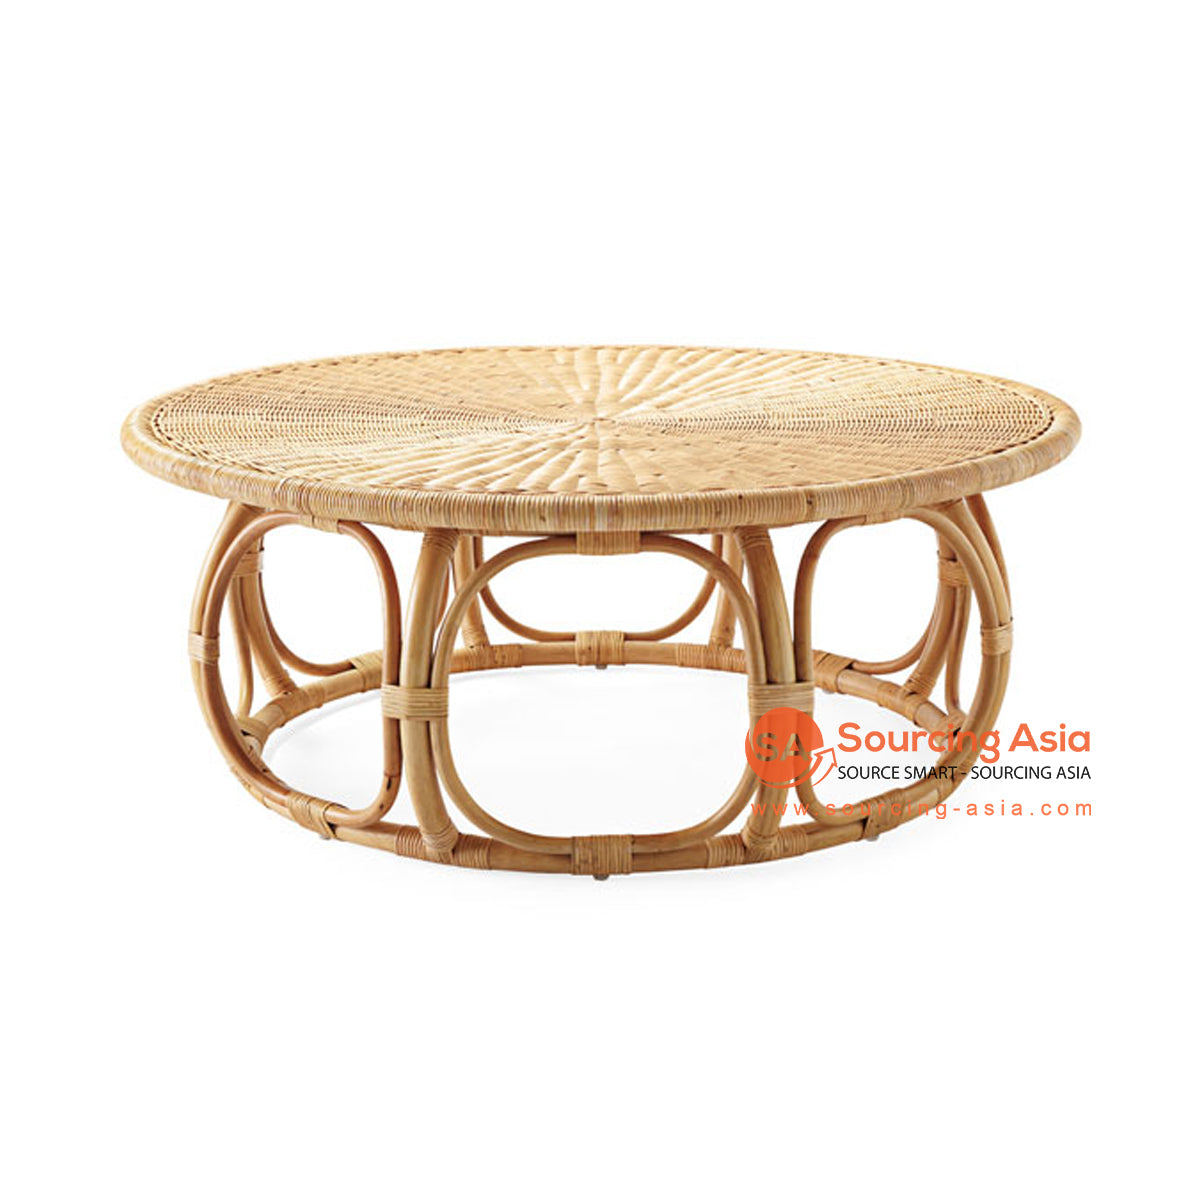 SHL200-1 NATURAL WOVEN RATTAN ROUND COFFEE TABLE